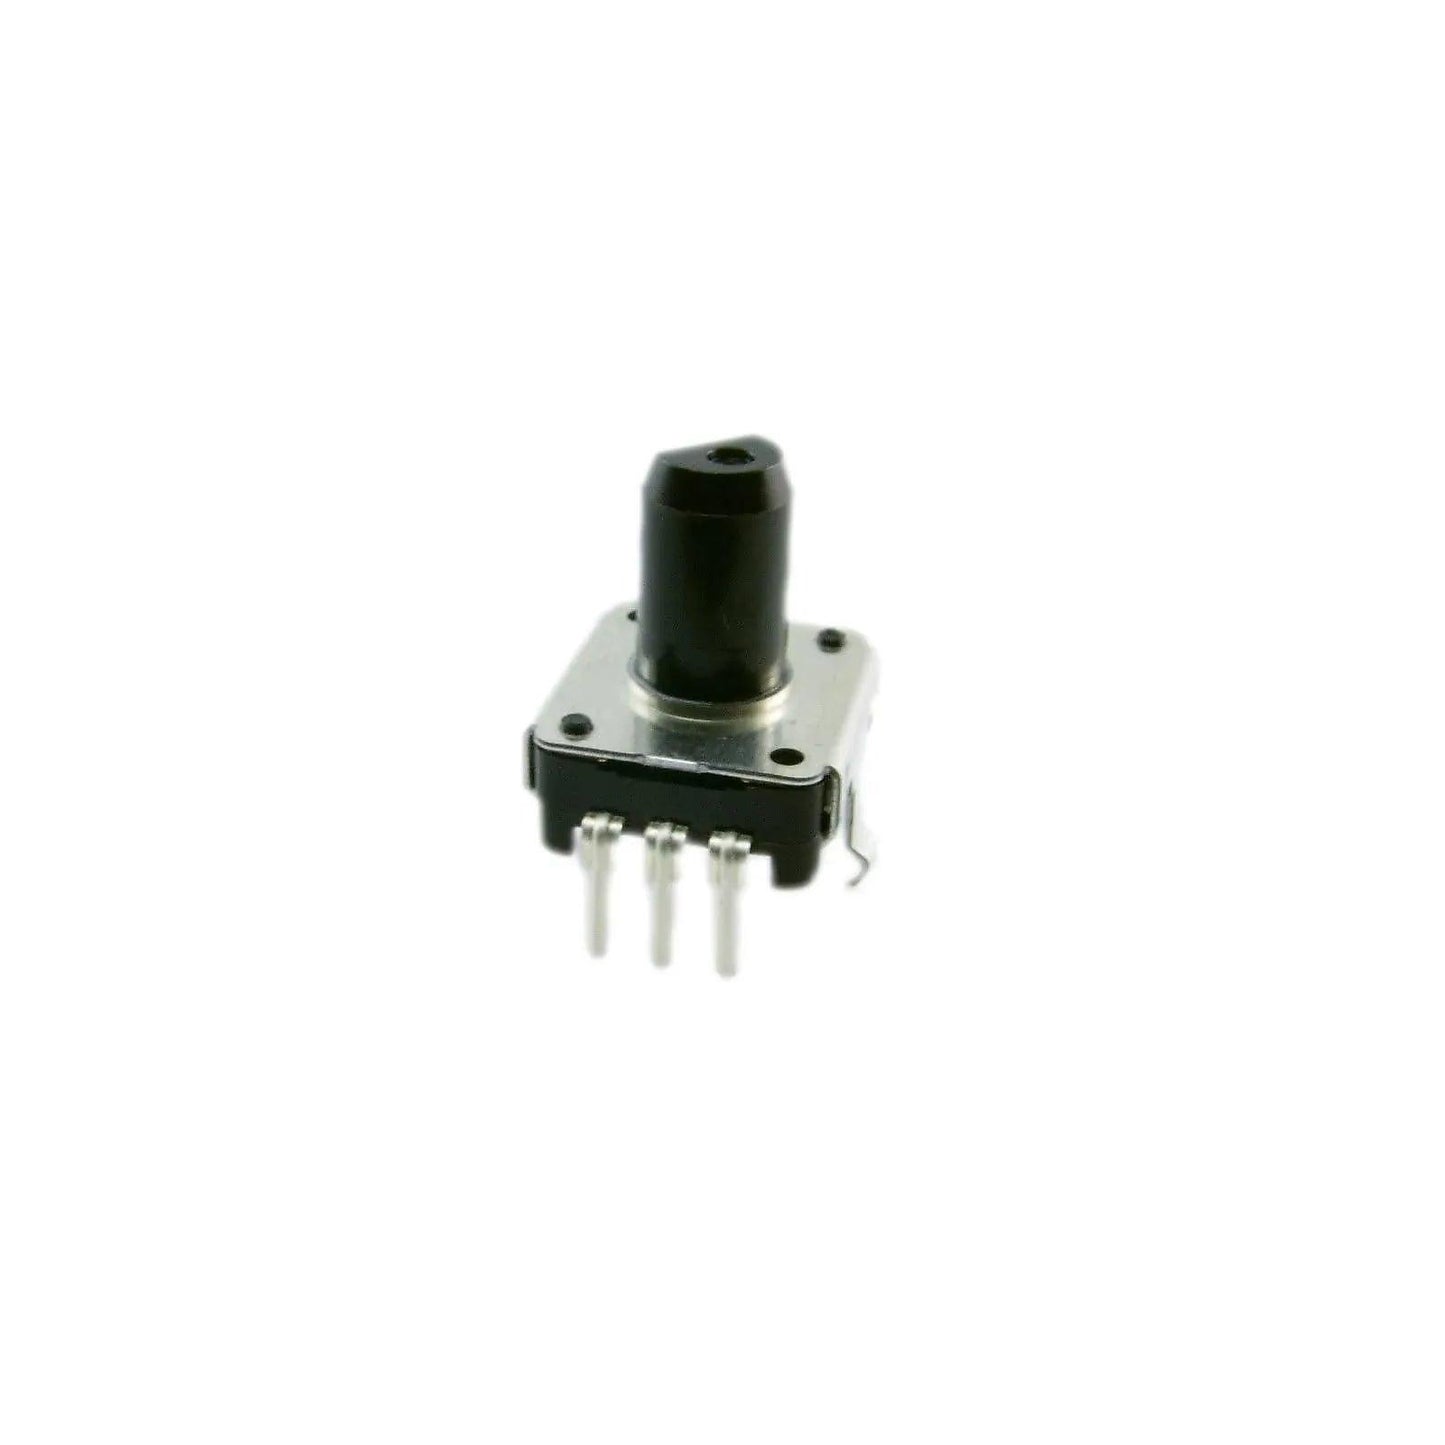 Casio - CT-X3000 - Rotary encoder - synthesizer-parts.com